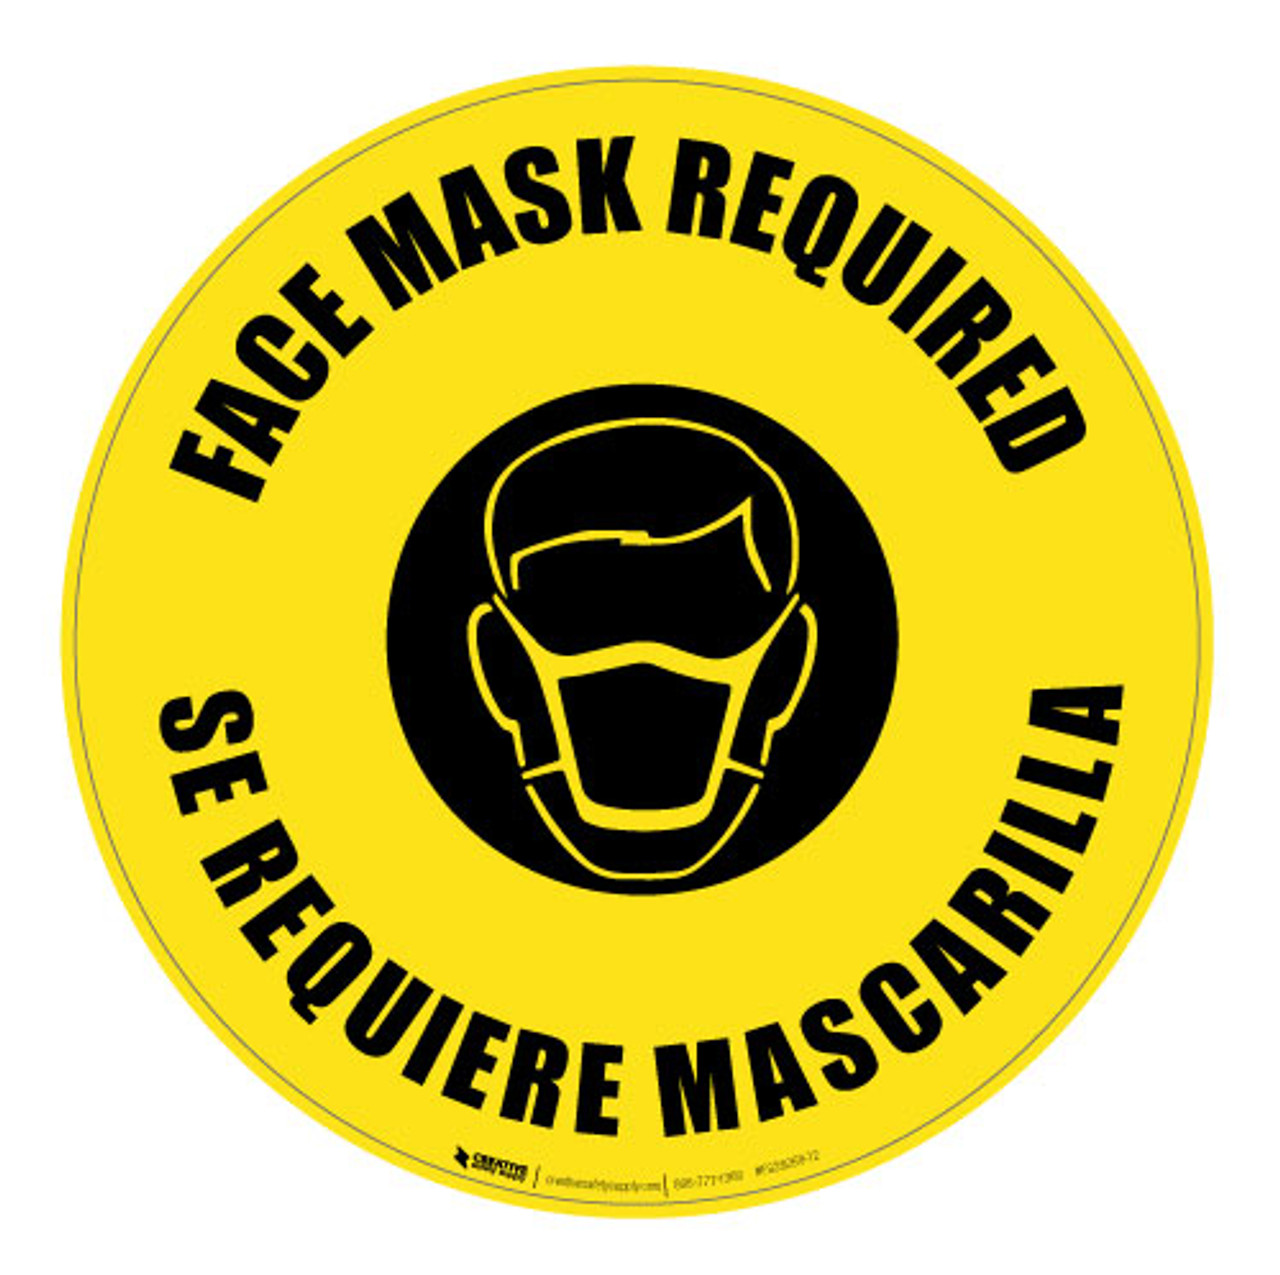 Face Mask Required - Bilingual - Floor Sign | Creative Safety Supply